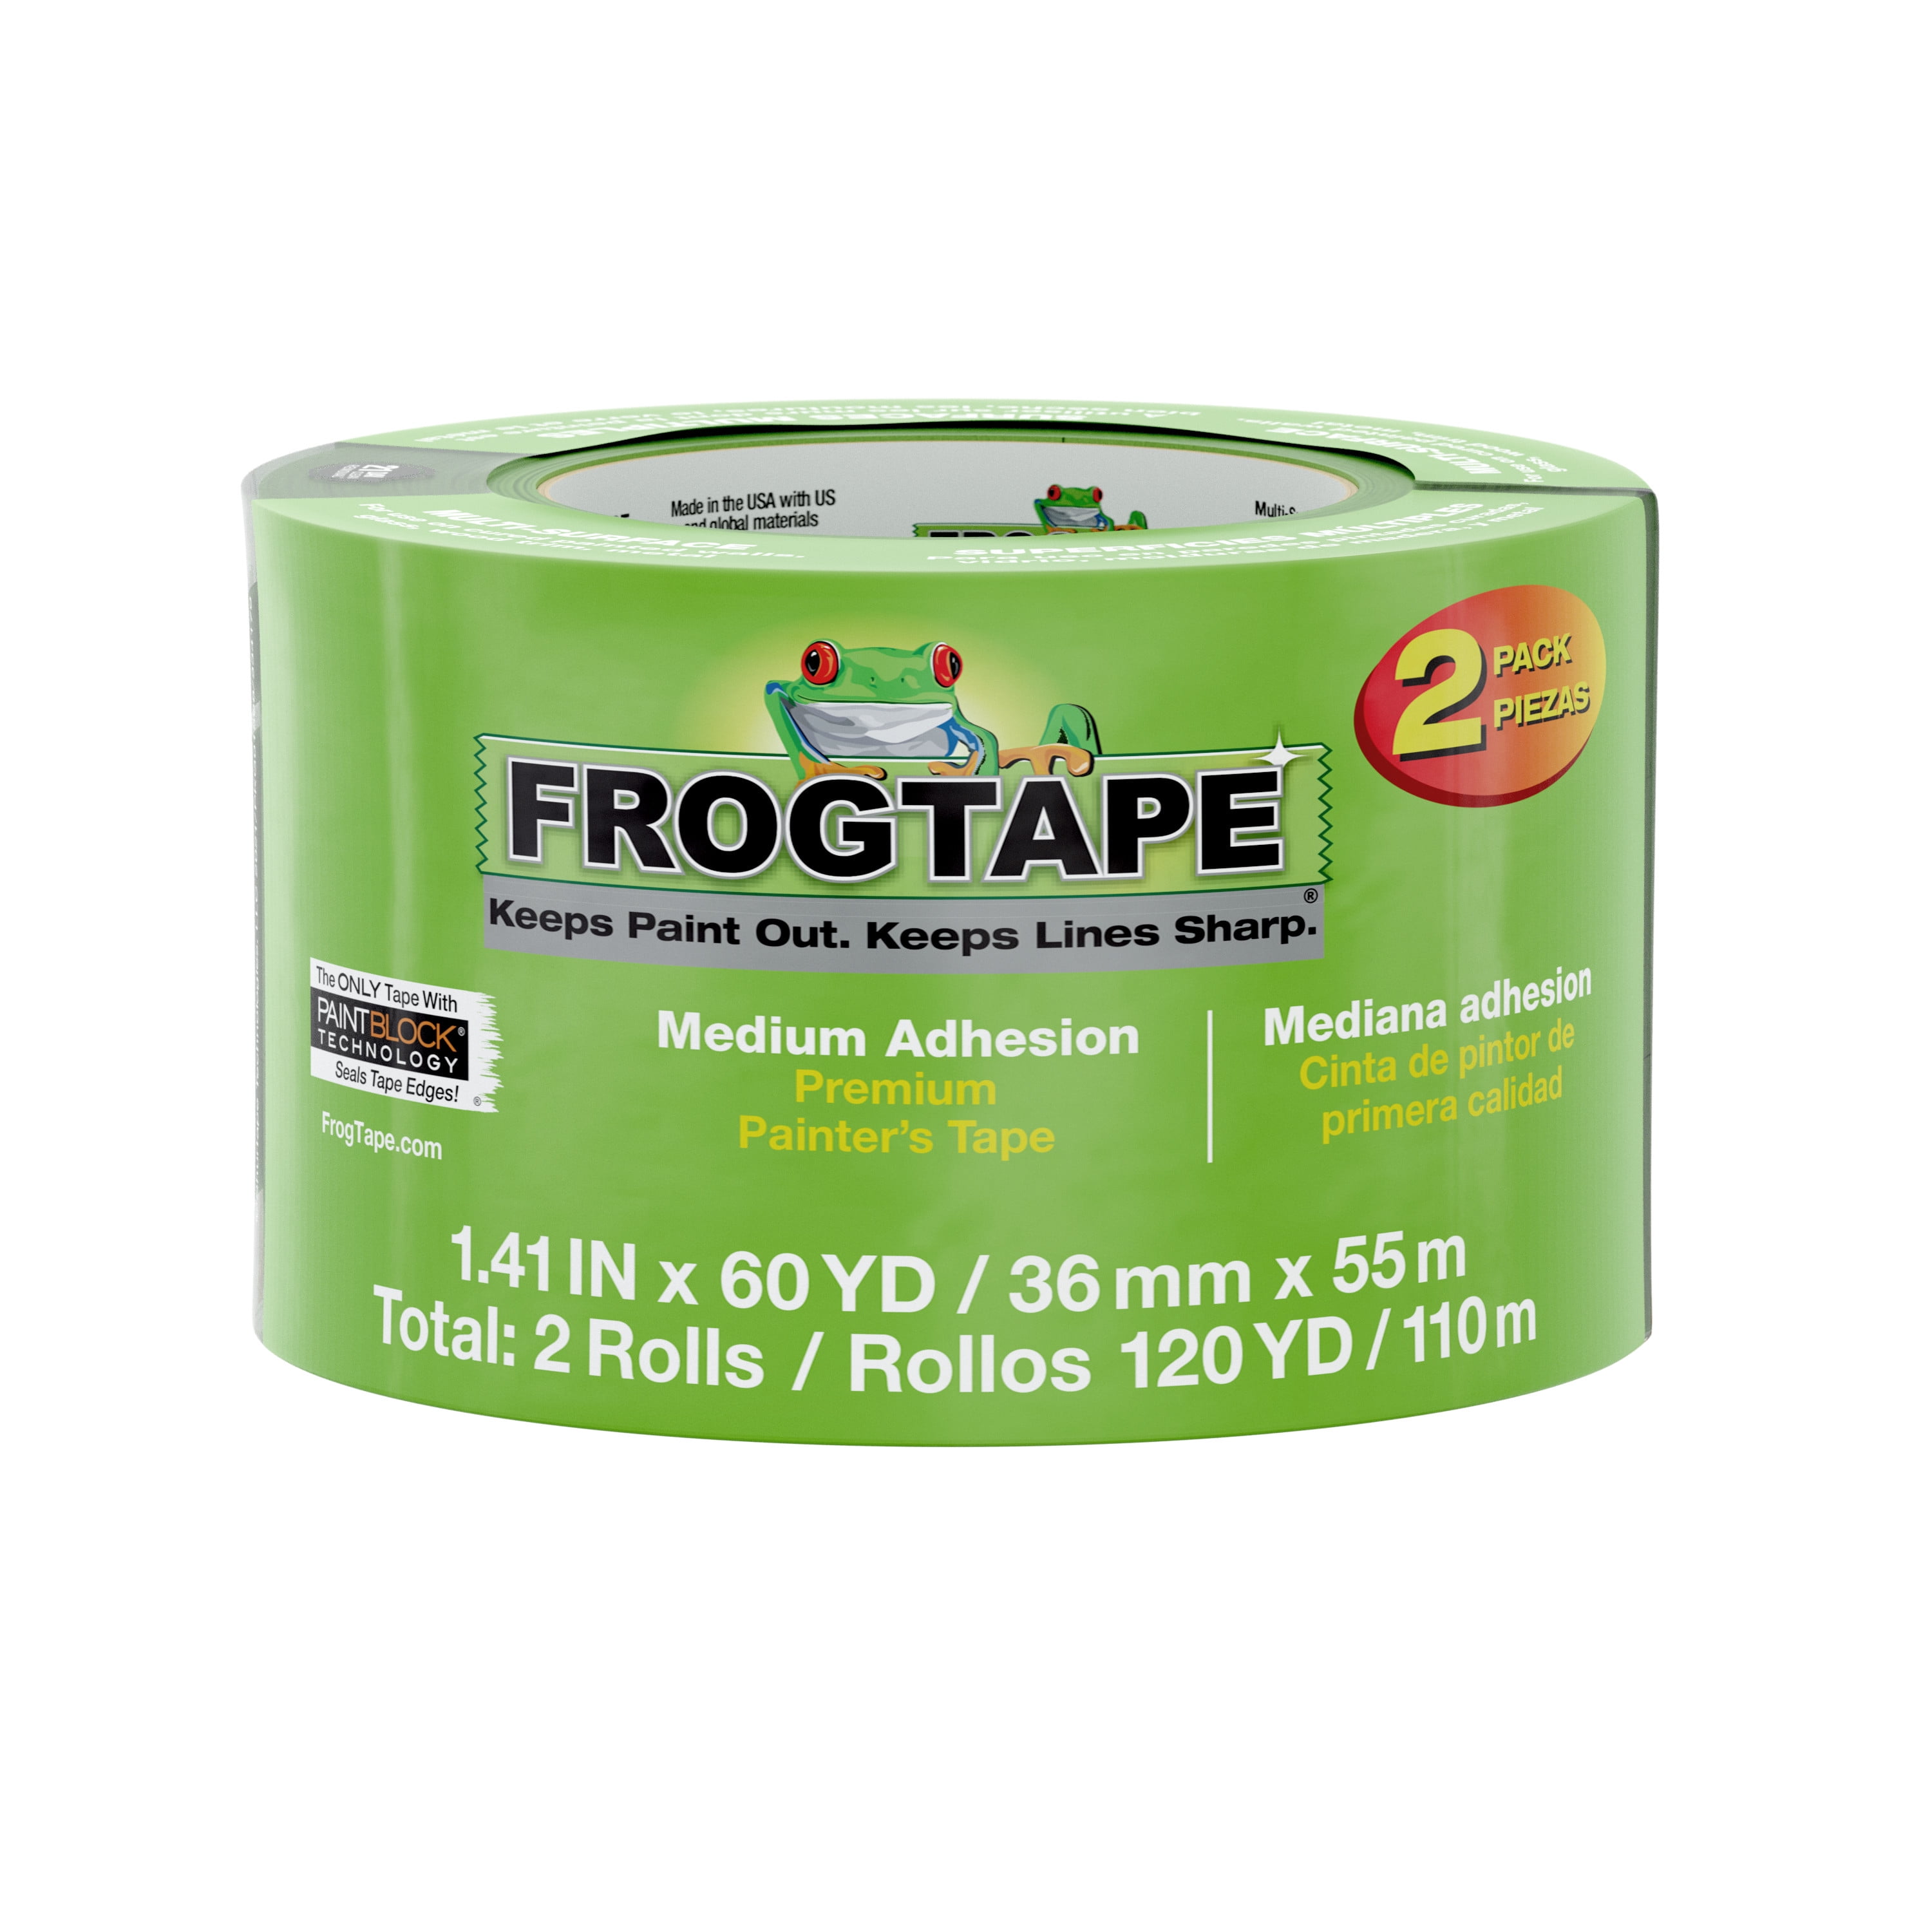 FrogTape Multi-Surface Painters Tape @ FindTape